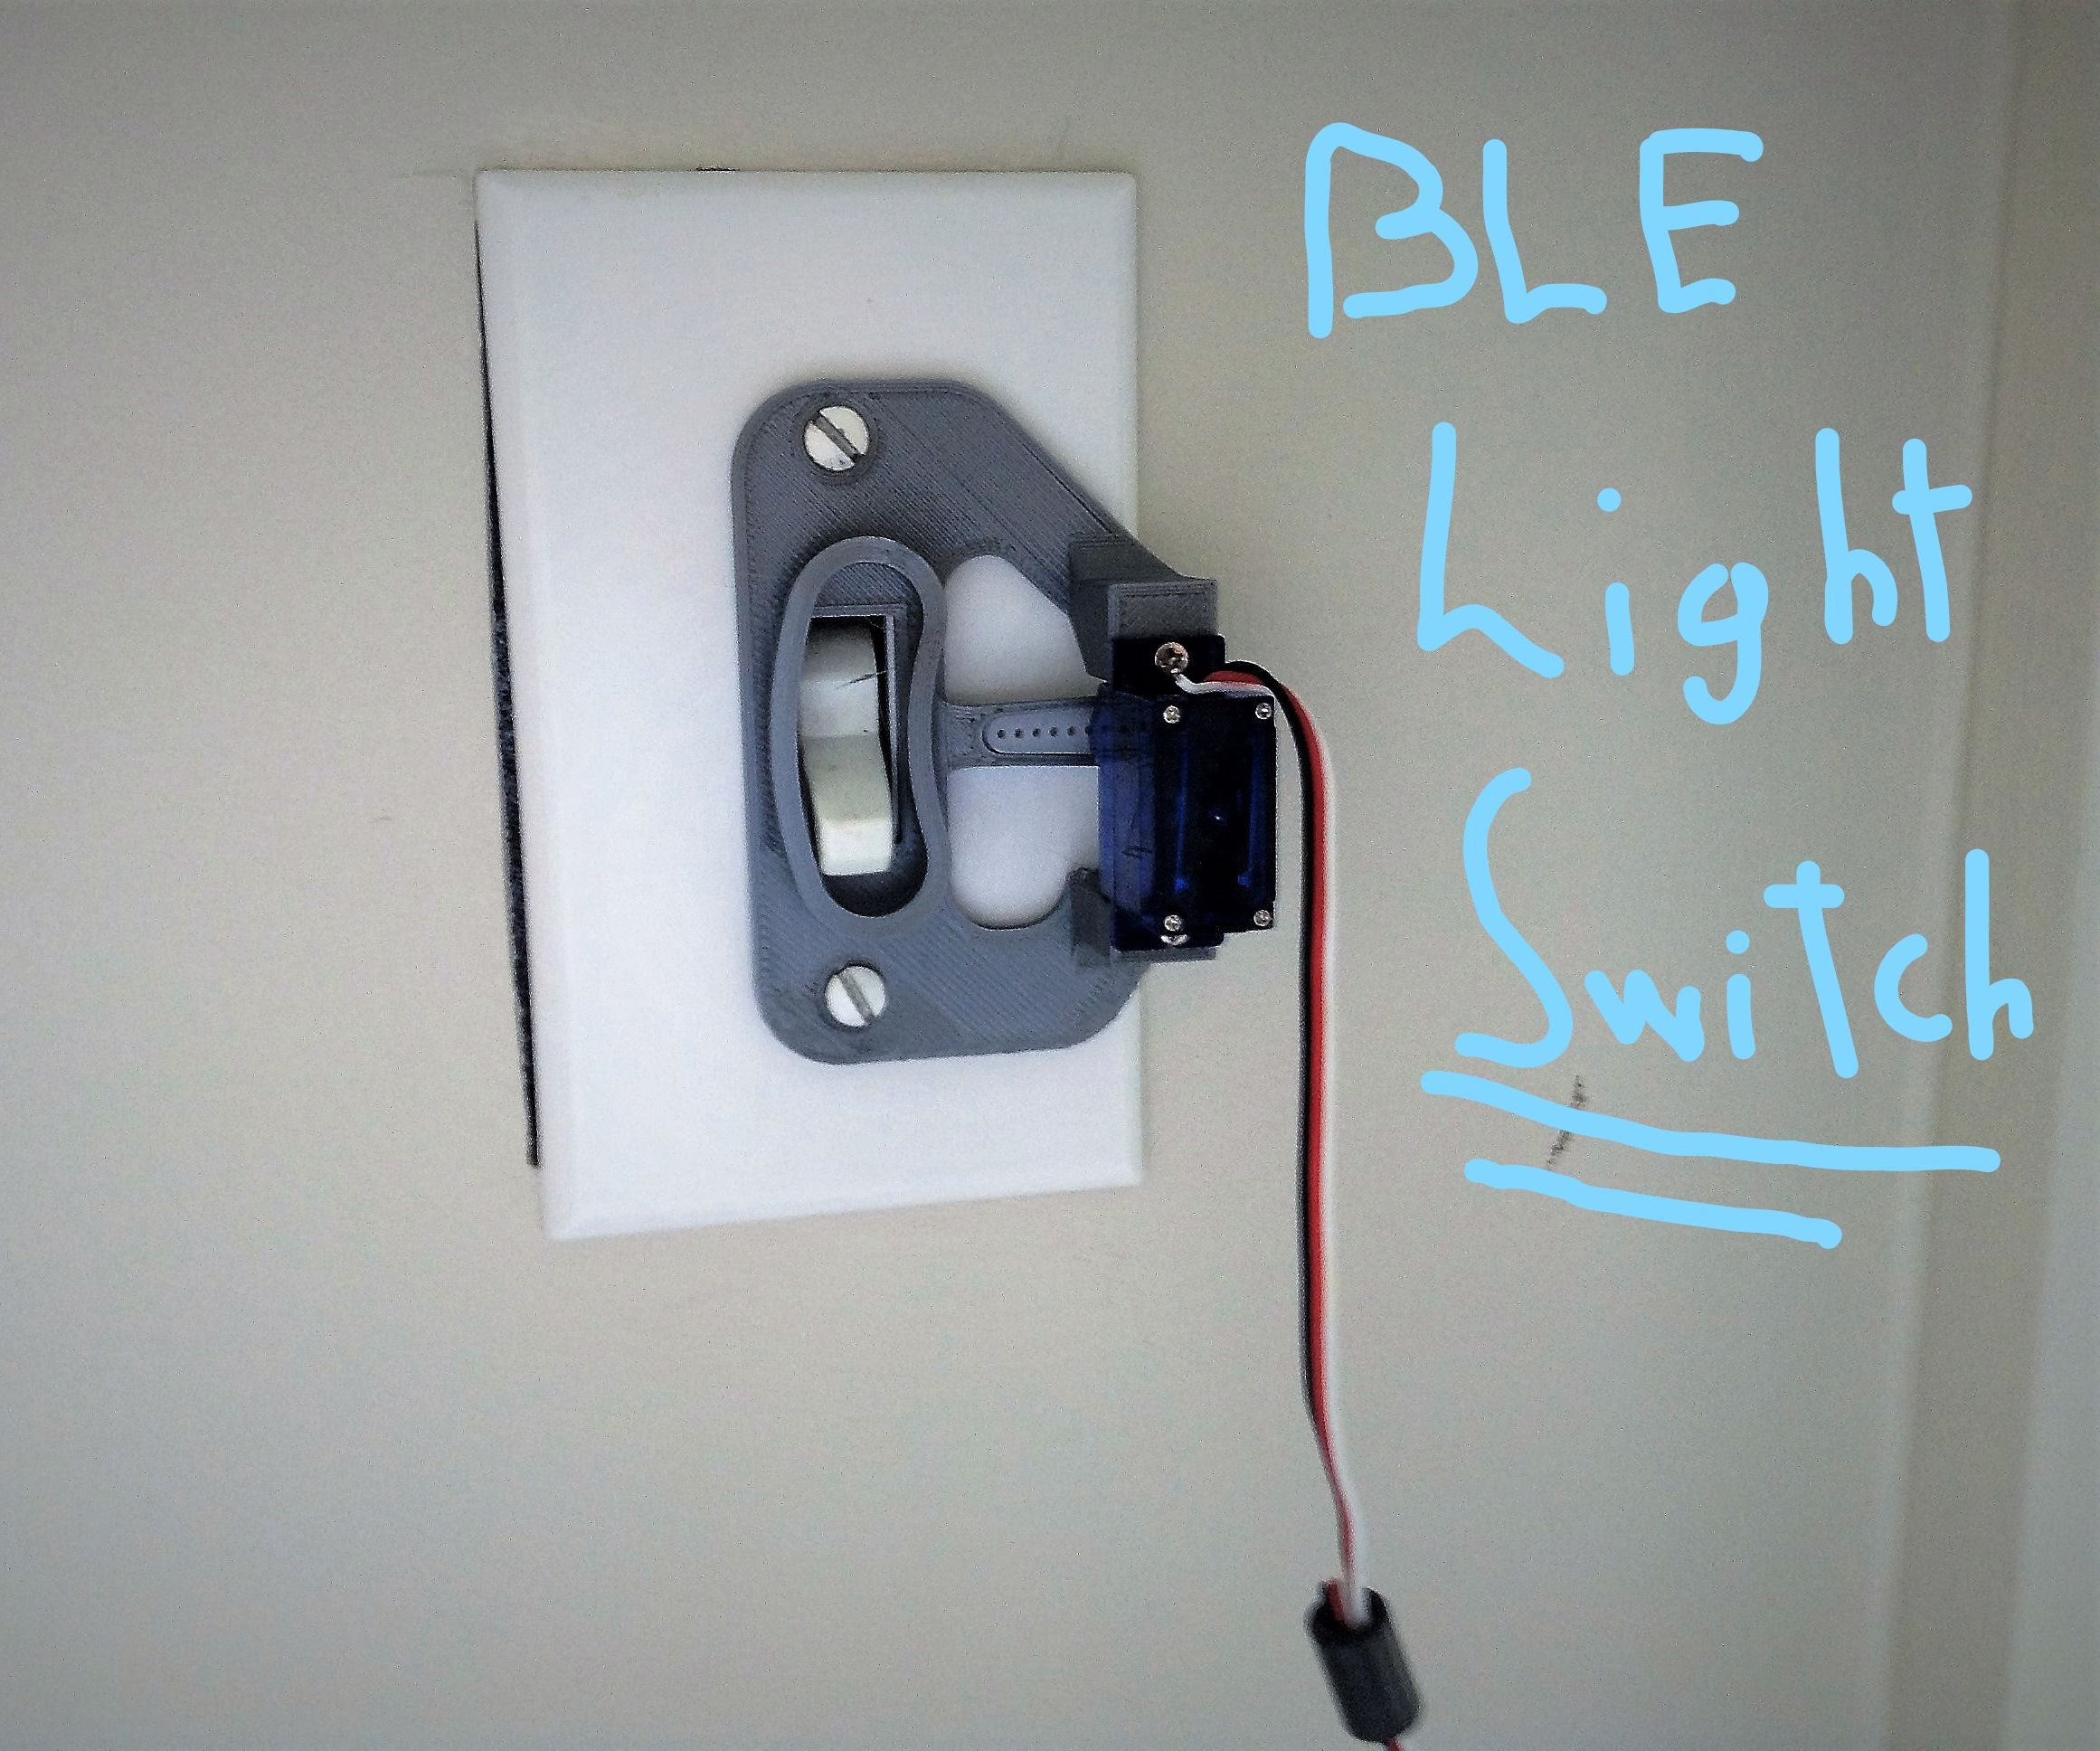 Smartphone-Controlled Light Switch